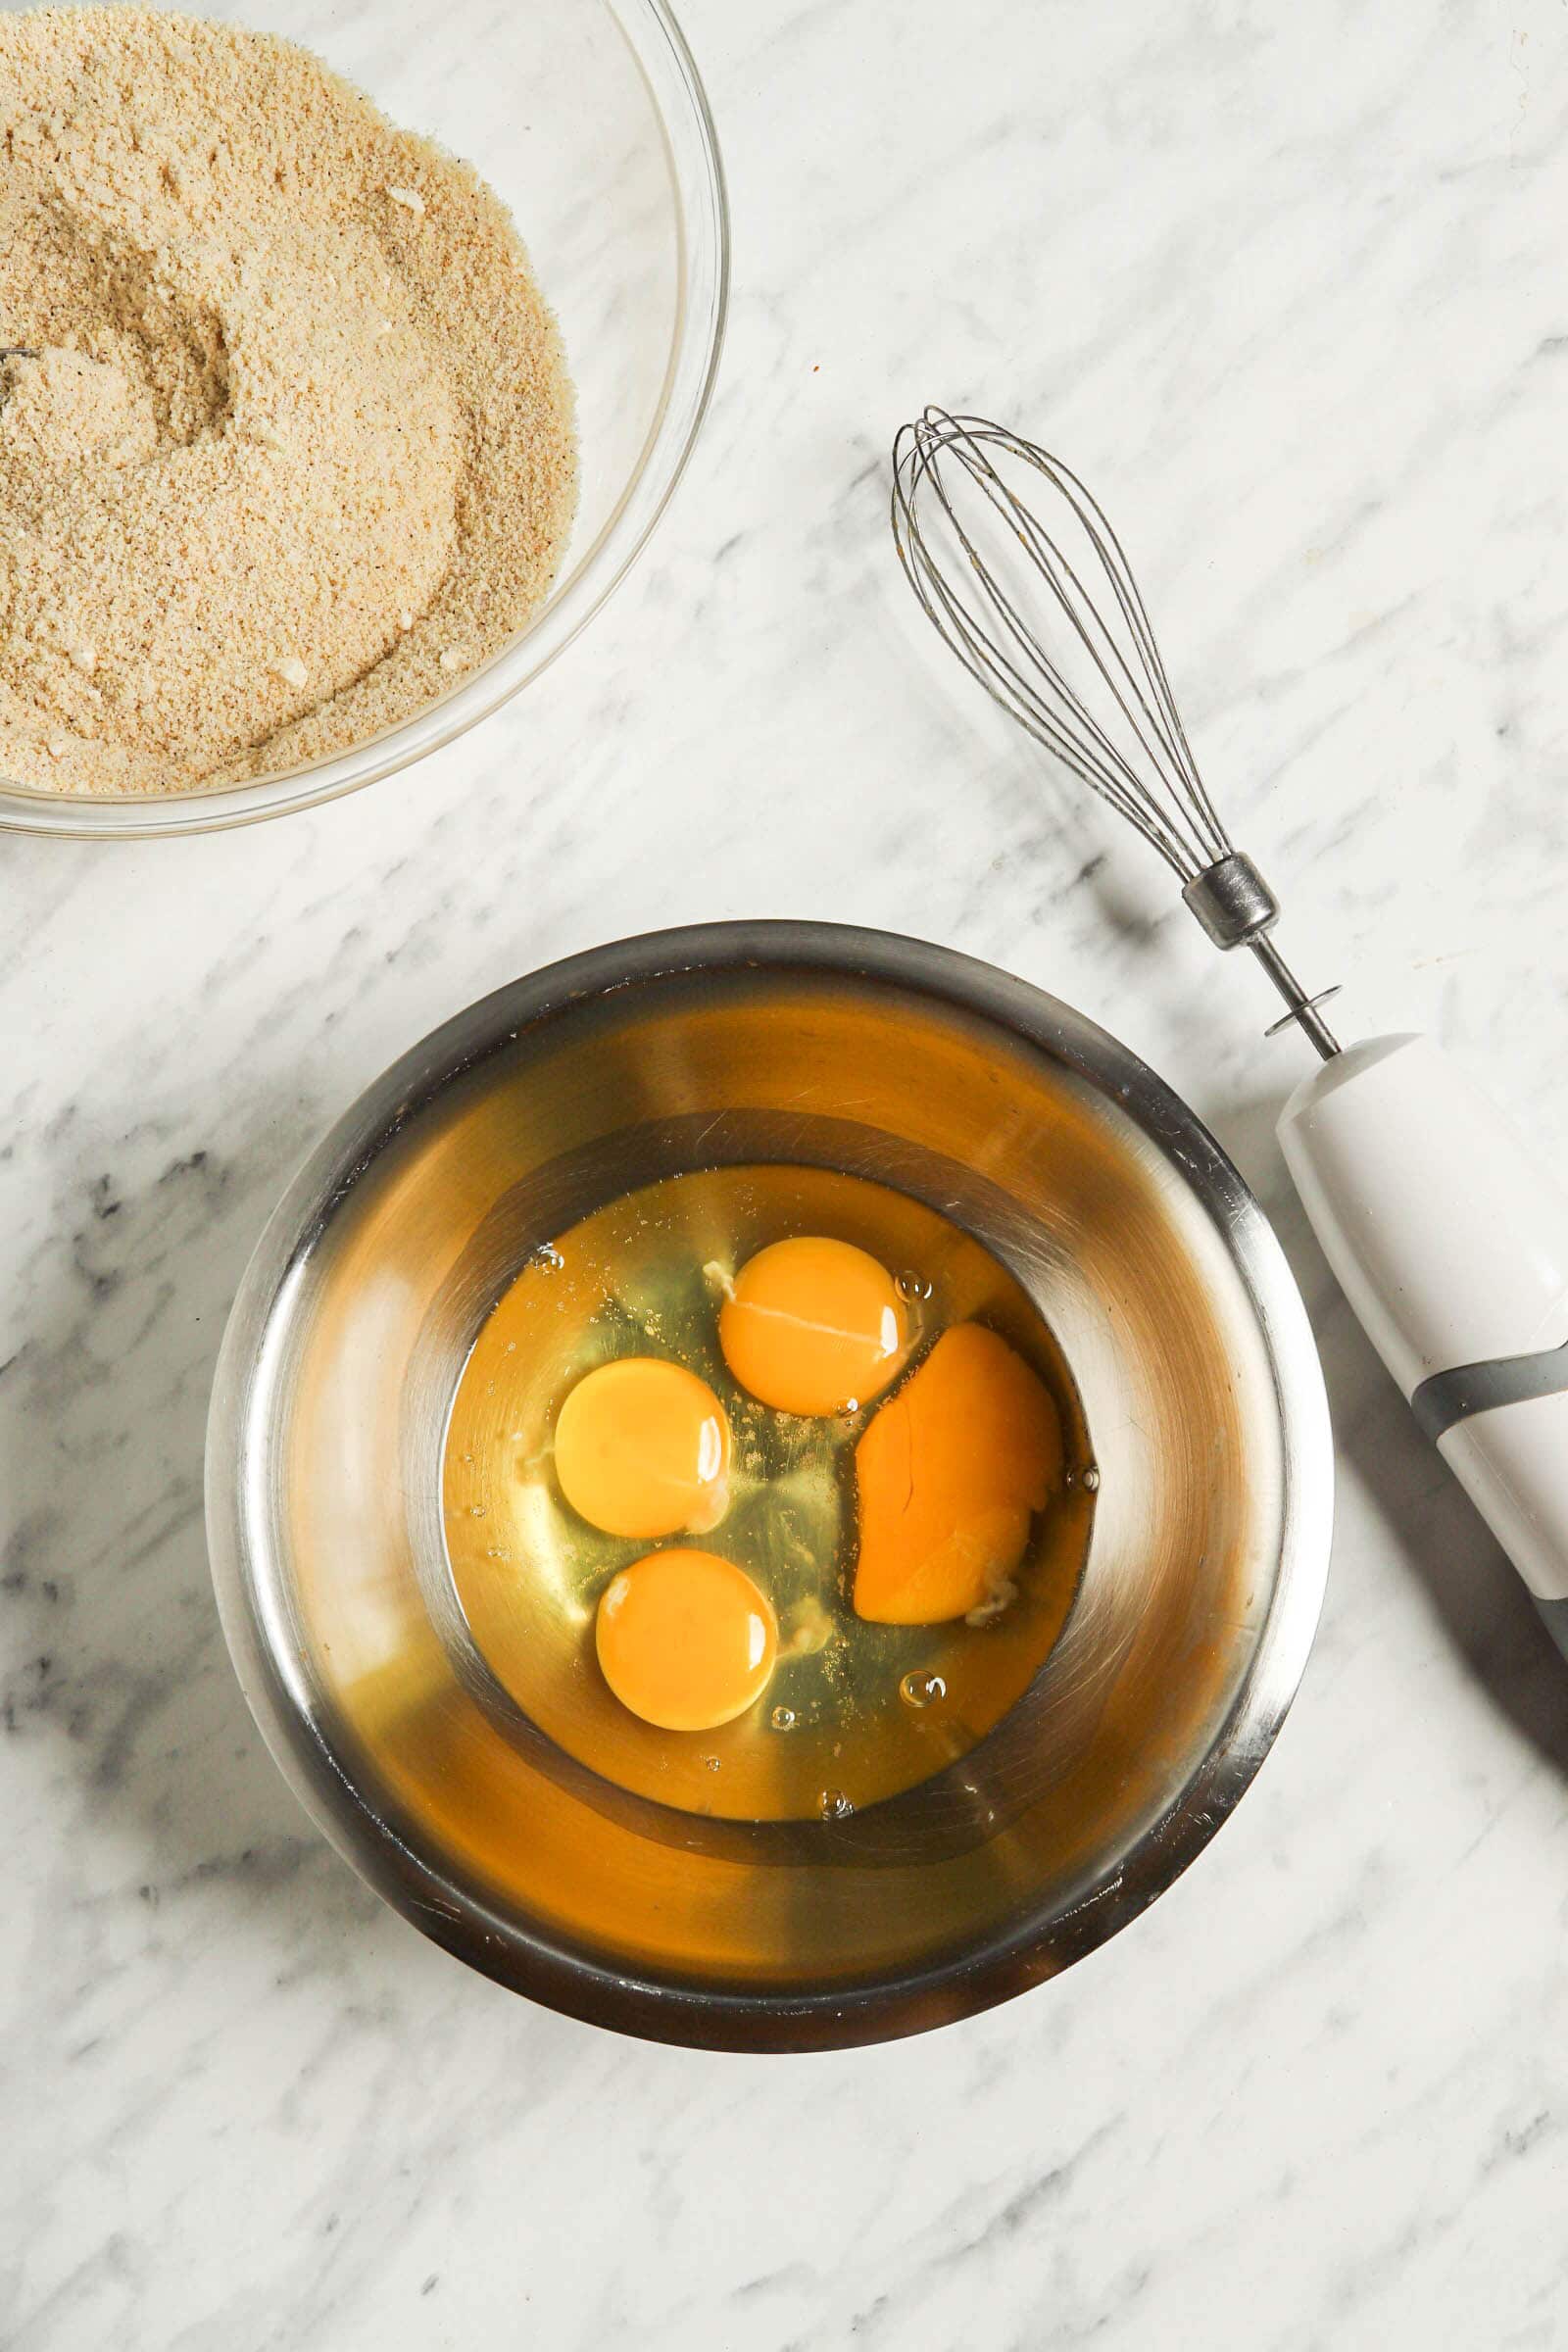 Picture of eggs in steel bowl with a whisk next to it.